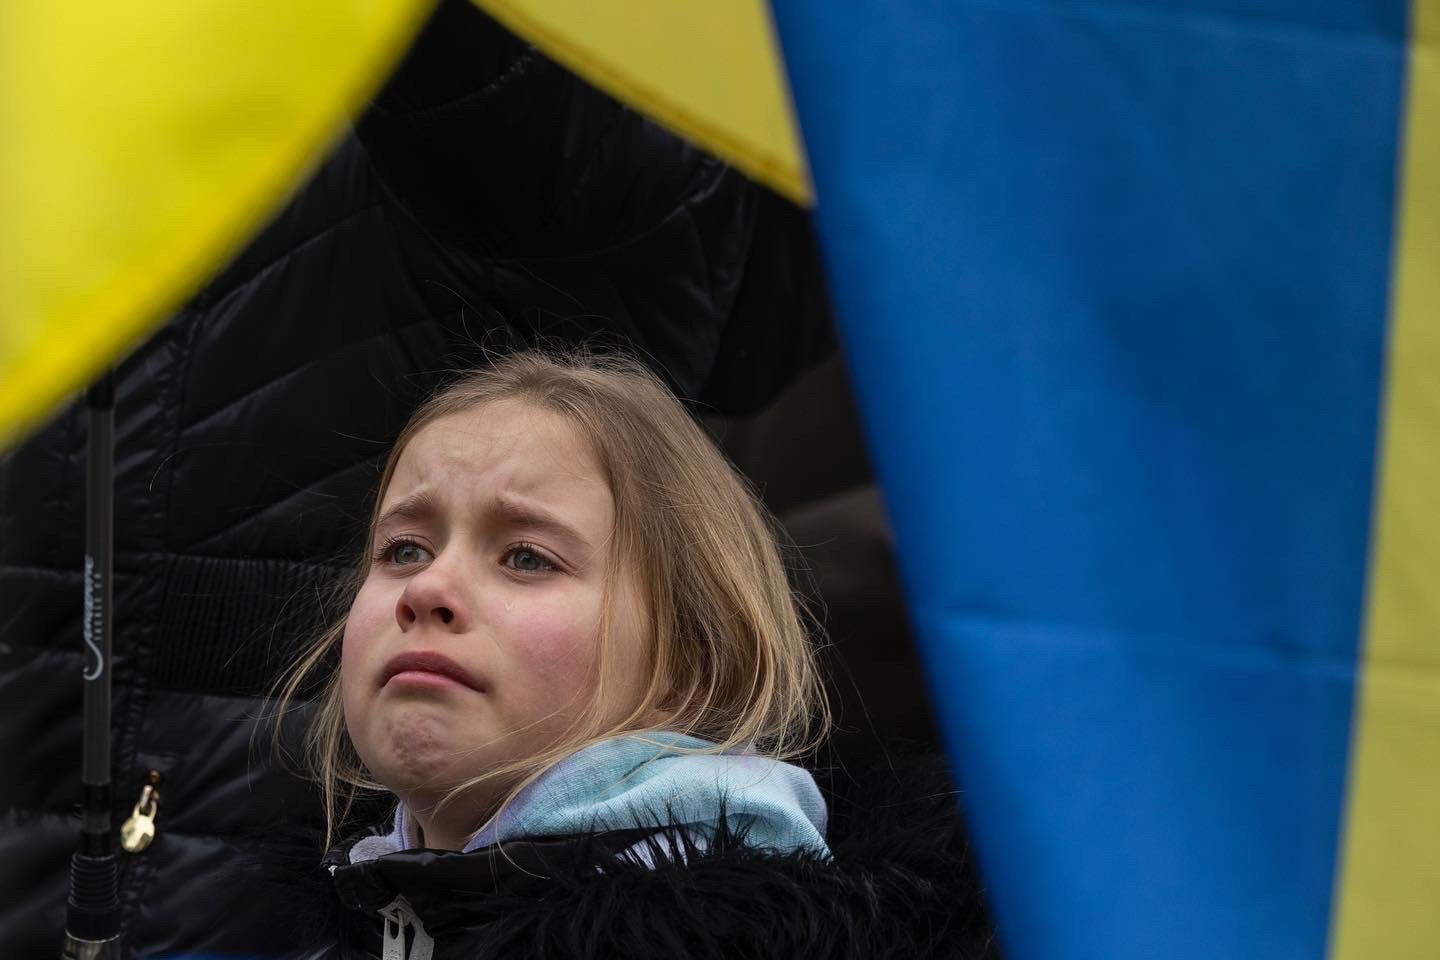  Bozhena Denisova, 9, cries as she marches against Russia’s invasion of Ukraine during a rally in Philadelphia, Pennsylvania on March 27, 2022. (On assignment for Reuters) 